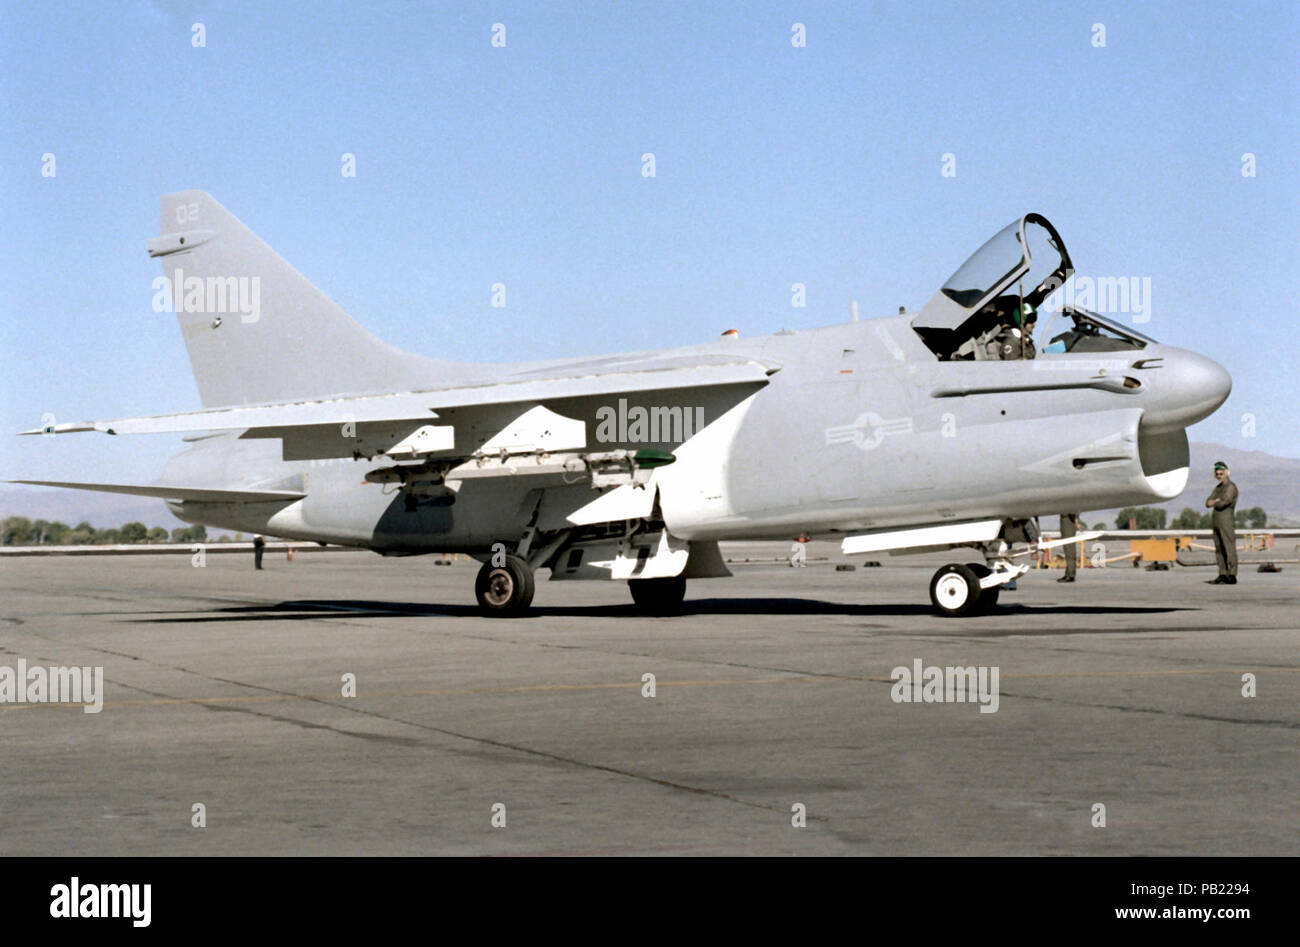 A-7B VA-305 Fallon 1981. A right side view of a Naval Air Reserve Attack Squadron 305 (VA-305) A-7 Corsair II aircraft as it prepares for take-off during the unit's active duty training. Stock Photo